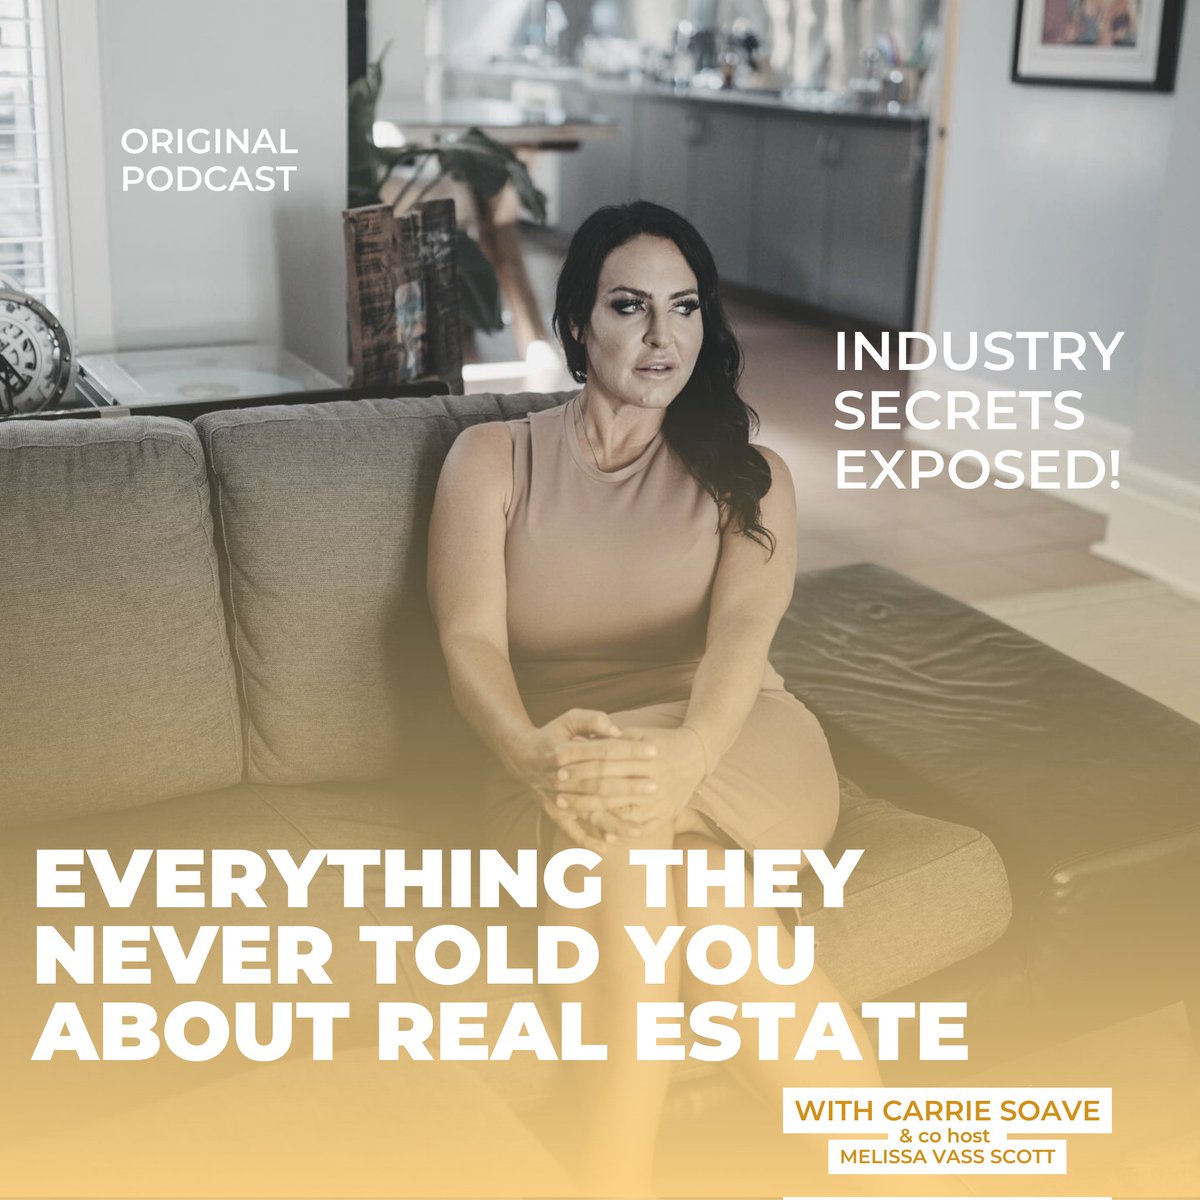 🎙Industry Secrets Exposed #Podcast w/@CarrieSoave (#RealEstateInfluencer & #SocialMediaCoach)
🎧linktr.ee/carriesoave
📺youtu.be/HyP7PIjau_A
#realestate #realestateinvesting
#realestateinvestment
#realestateexpert #realestateinfluencer #realestatepodcast #realestatetips